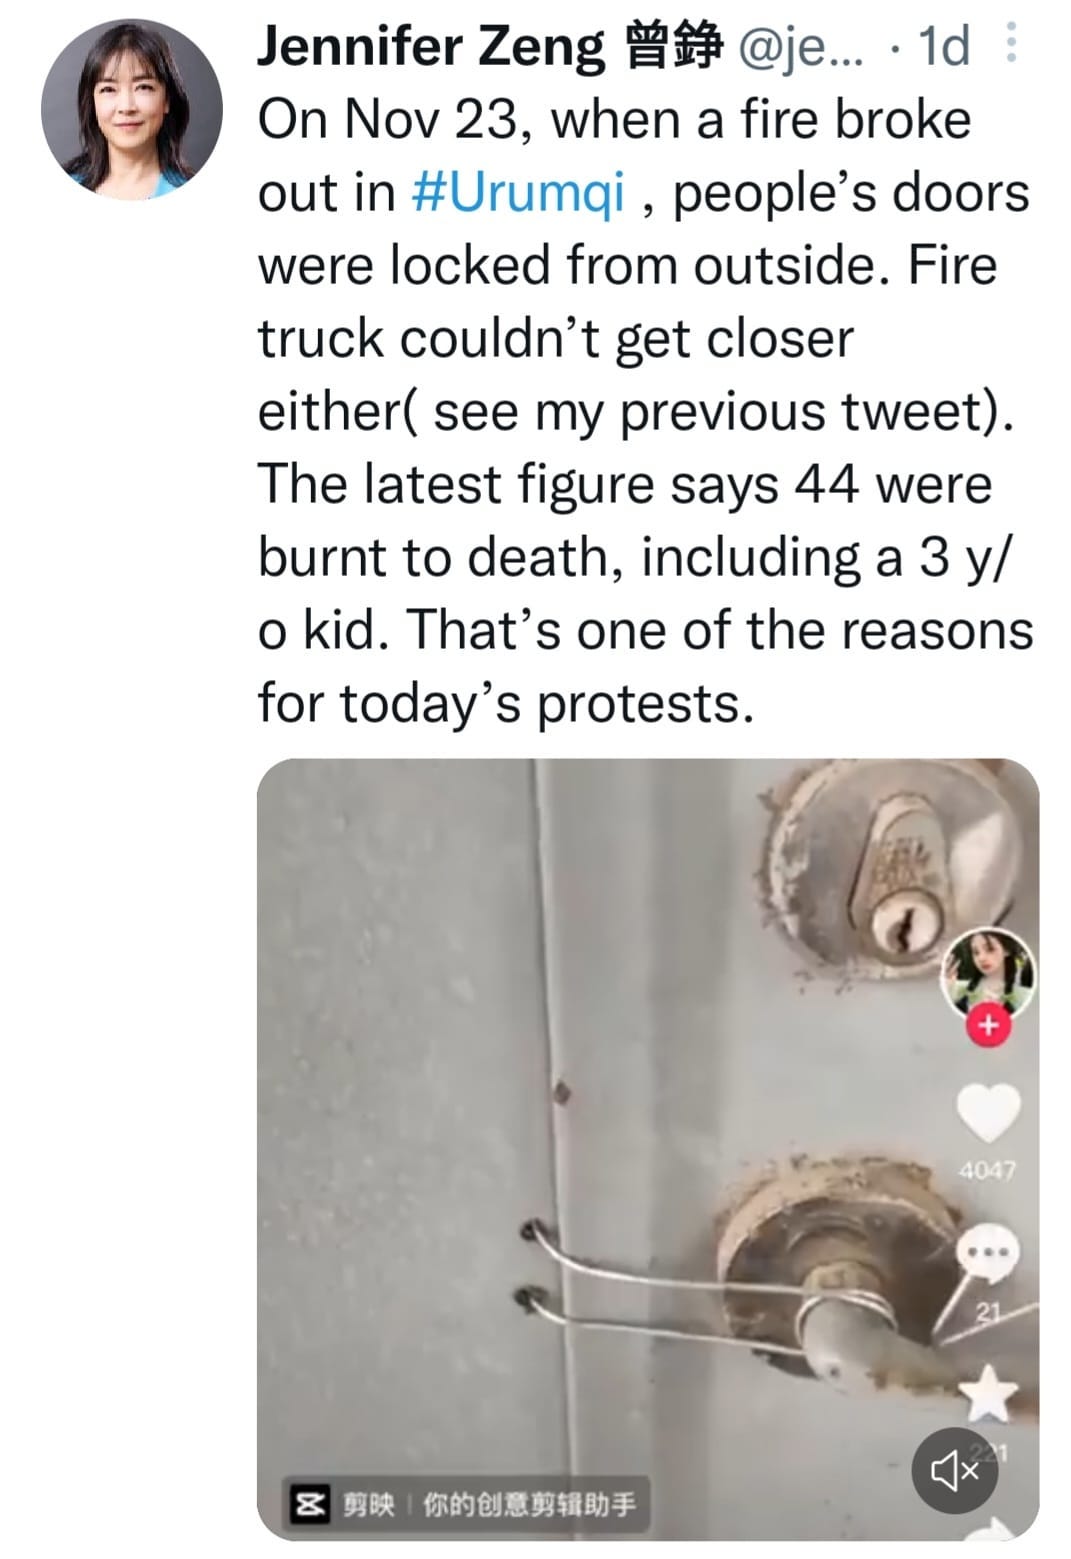 May be an image of 1 person and text that says 'Jennifer Zeng 曾錄 @je... .1d On Nov 23, when a fire broke out in #Urumi people's doors were locked from outside. Fire truck couldn't get closer either( see my previous tweet) The latest figure says 44 were burnt to death, including a 3 y/ o kid. That's one of the reasons for today protests. 4047 8剪映 剪映 你的创意剪辑助手'